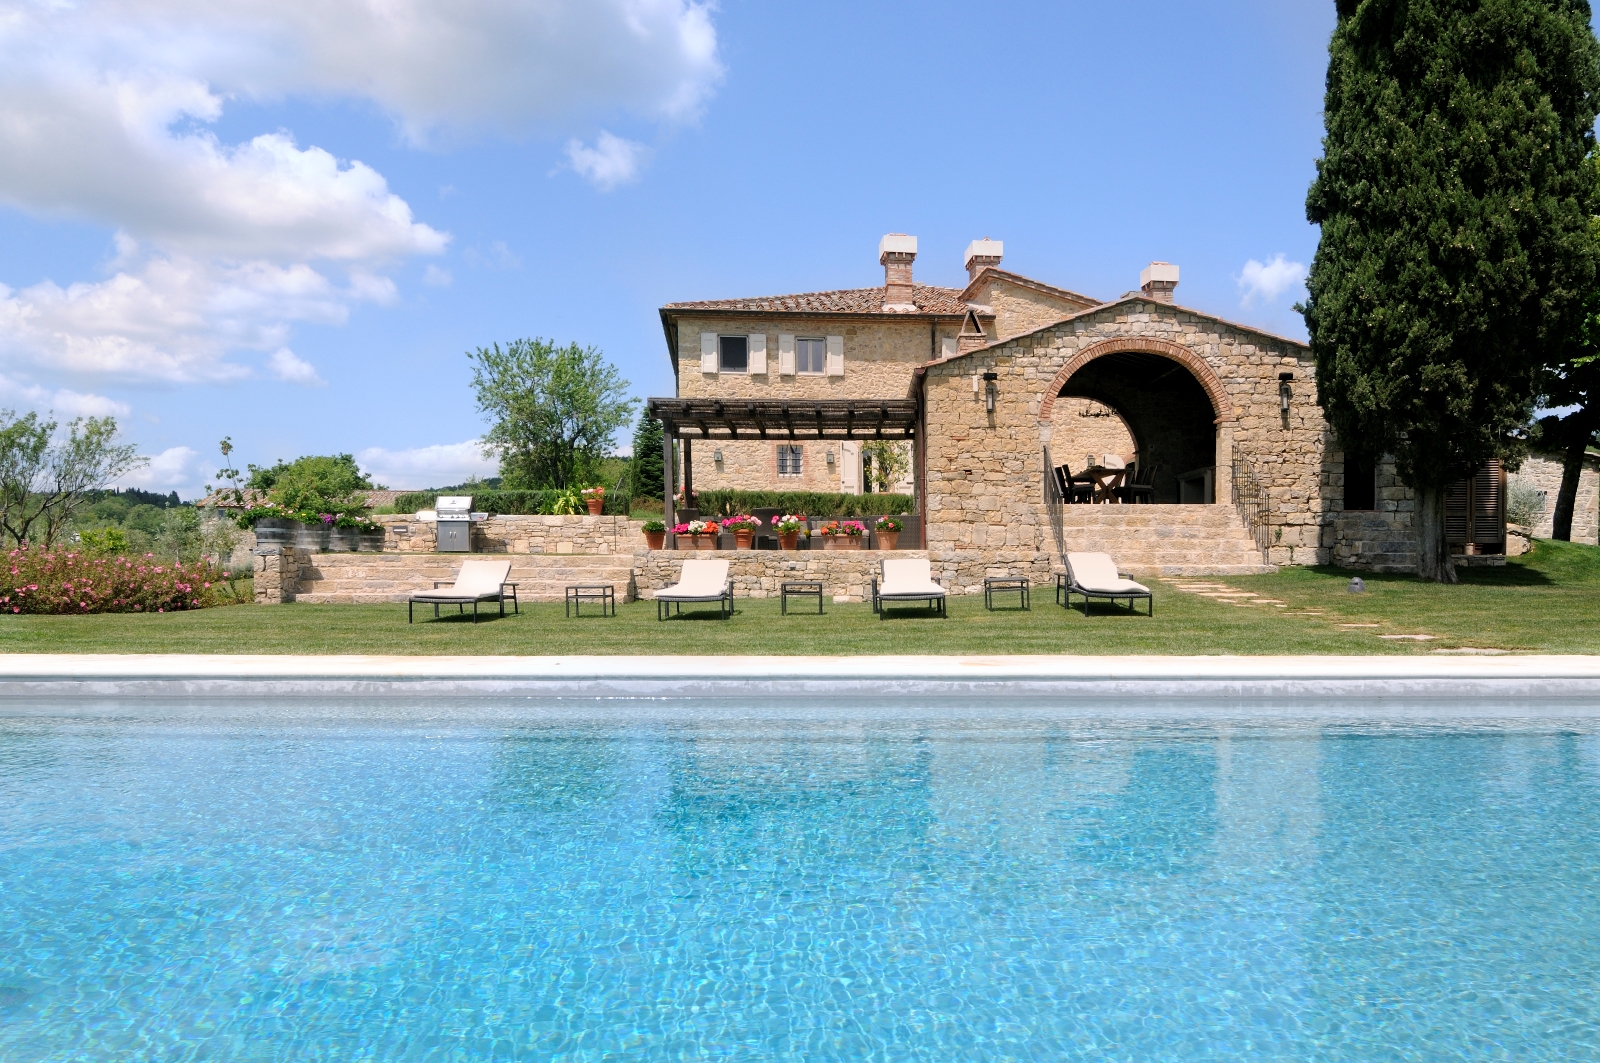 The swimming pool, sun loungers and facade of Tramonti, Tuscany